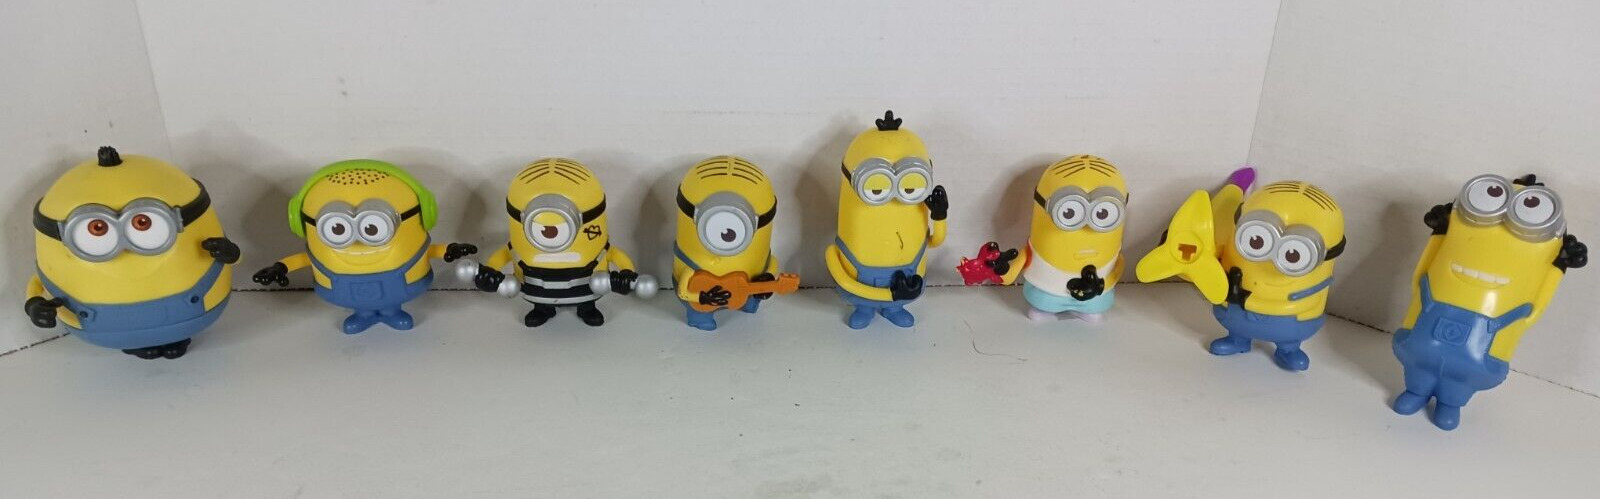 Lot of 8 Despicable Me Minions McDonald\'s Happy Meal Toys